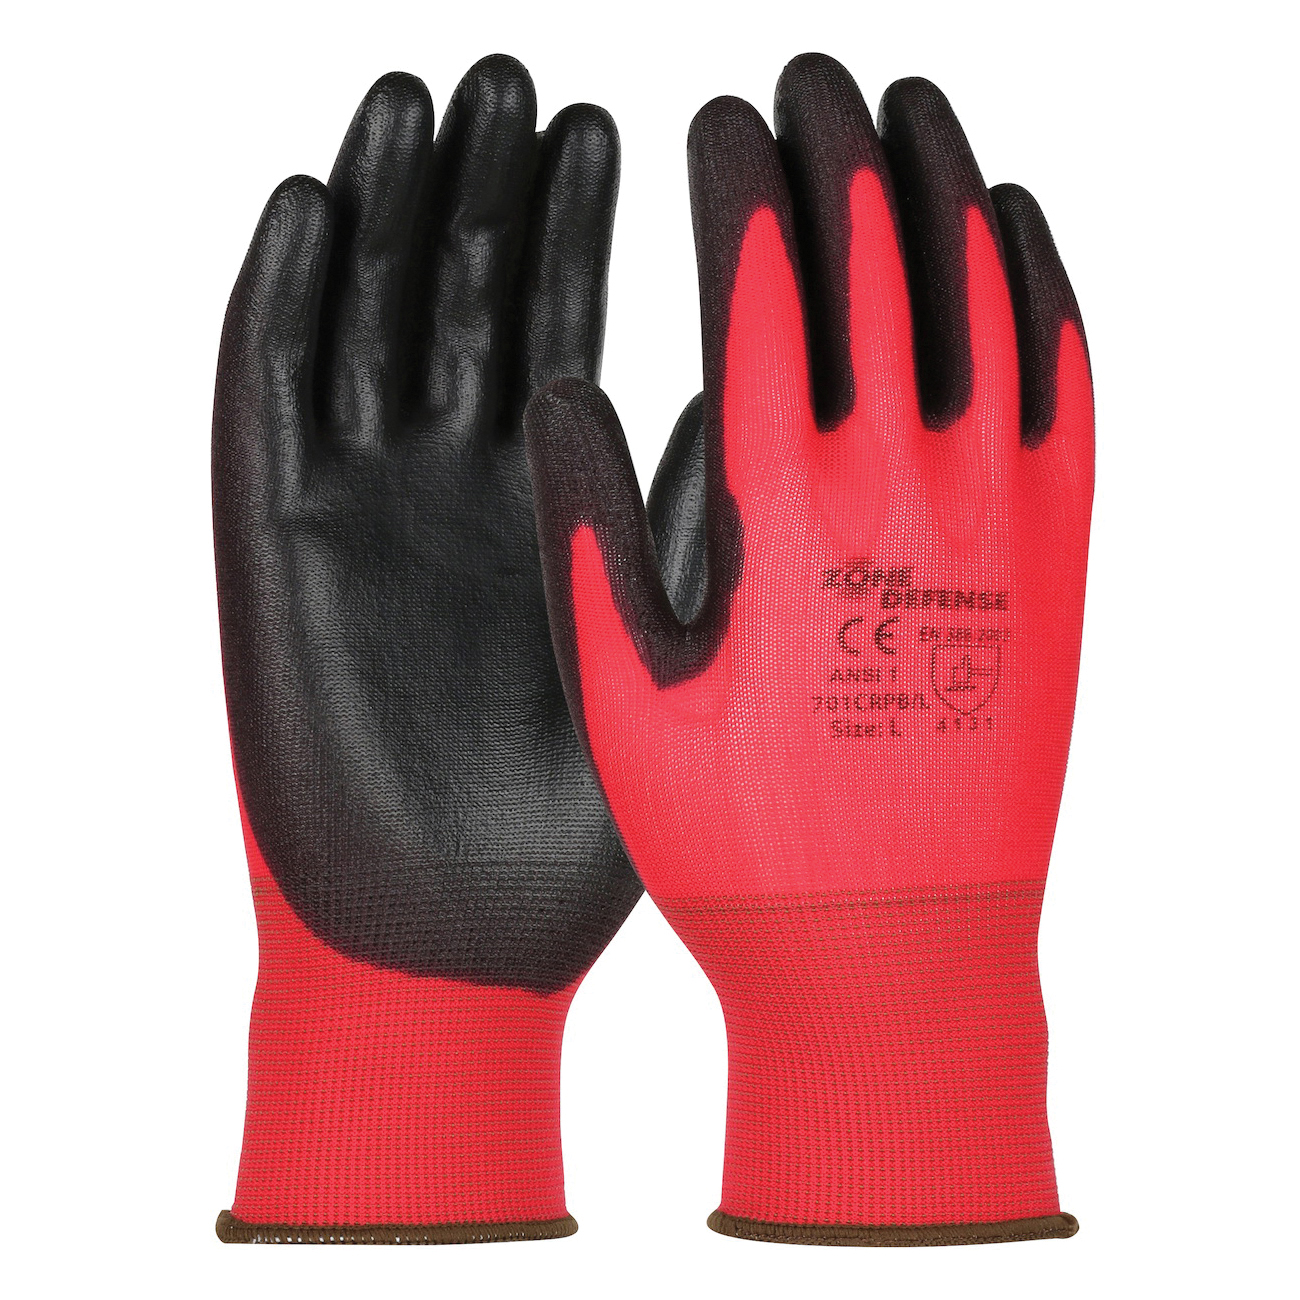 PIP® 701CRPB/L Unisex General Purpose Gloves, Coated/Work, Seamless Style, L, Polyurethane Palm, Nylon, Black/Red, Ribbed Knit Wrist Cuff, Polyurethane Coating, Resists: Cut and Puncture